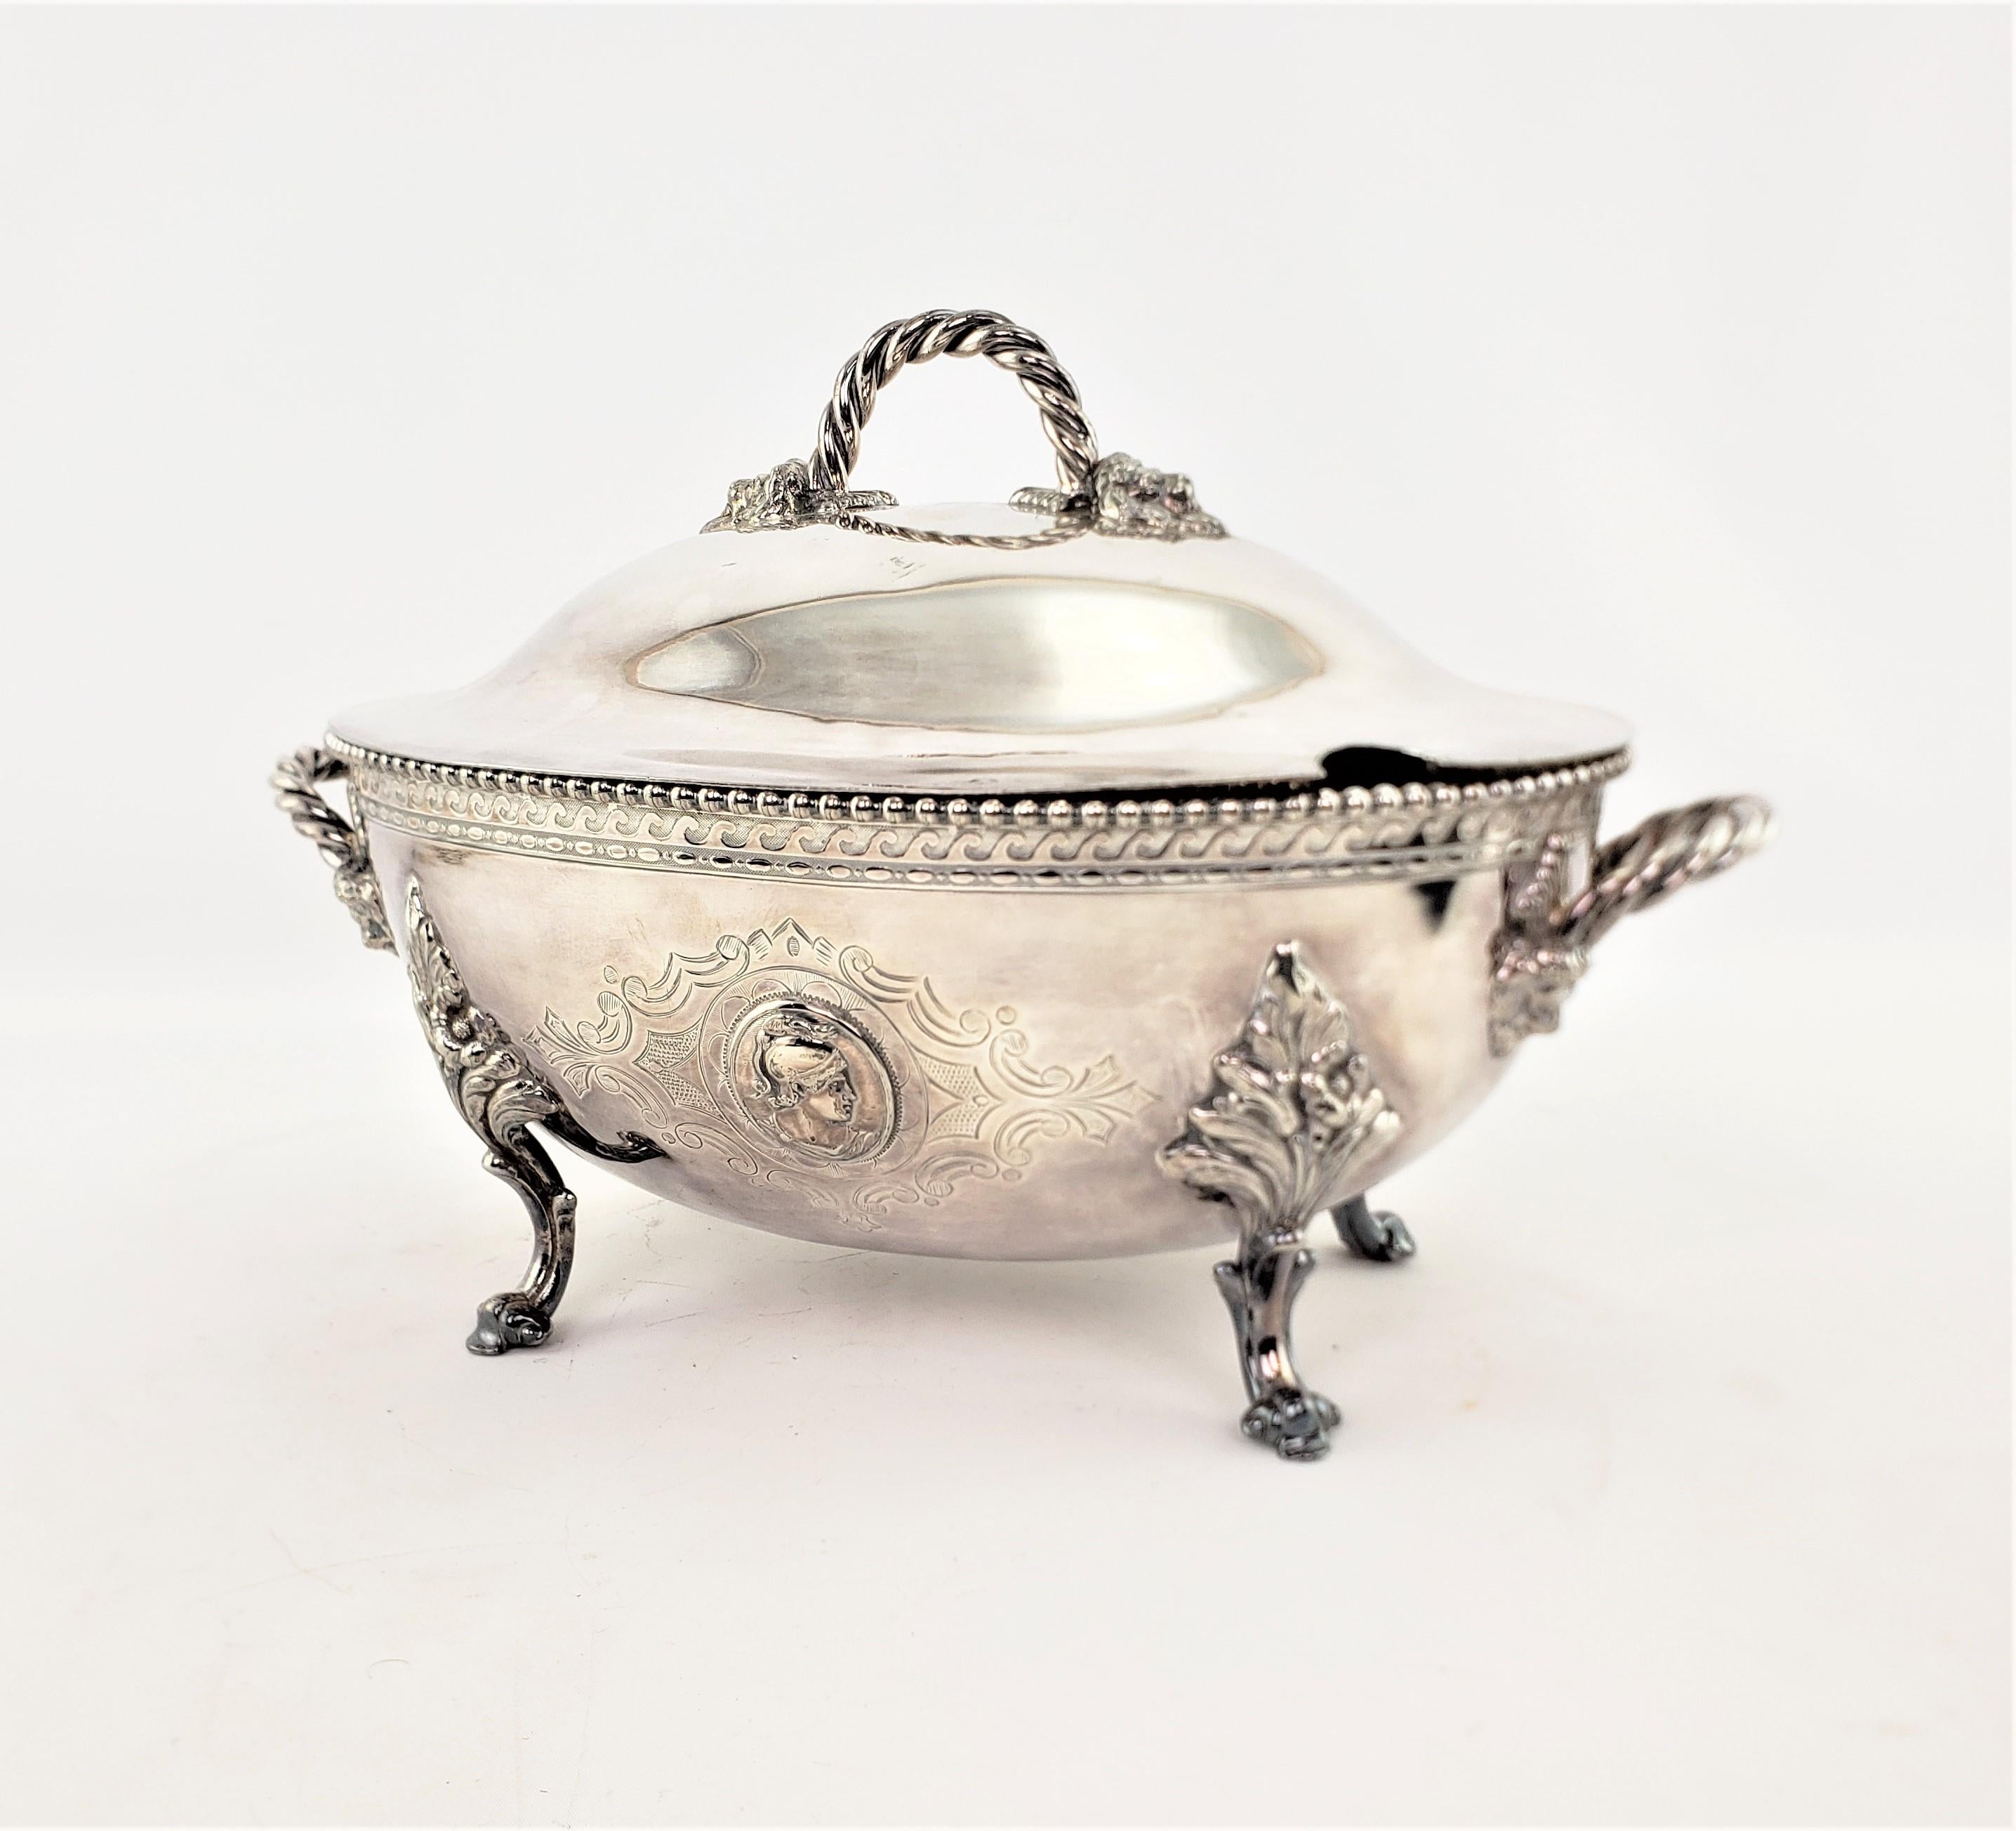 This antique tureen was made by the well known Reed & Barton Company of England and dates to approximately 1880 and done in the period Victorian style. This large egg shaped tureen is made of silver plate with stylized rope handles and lion head